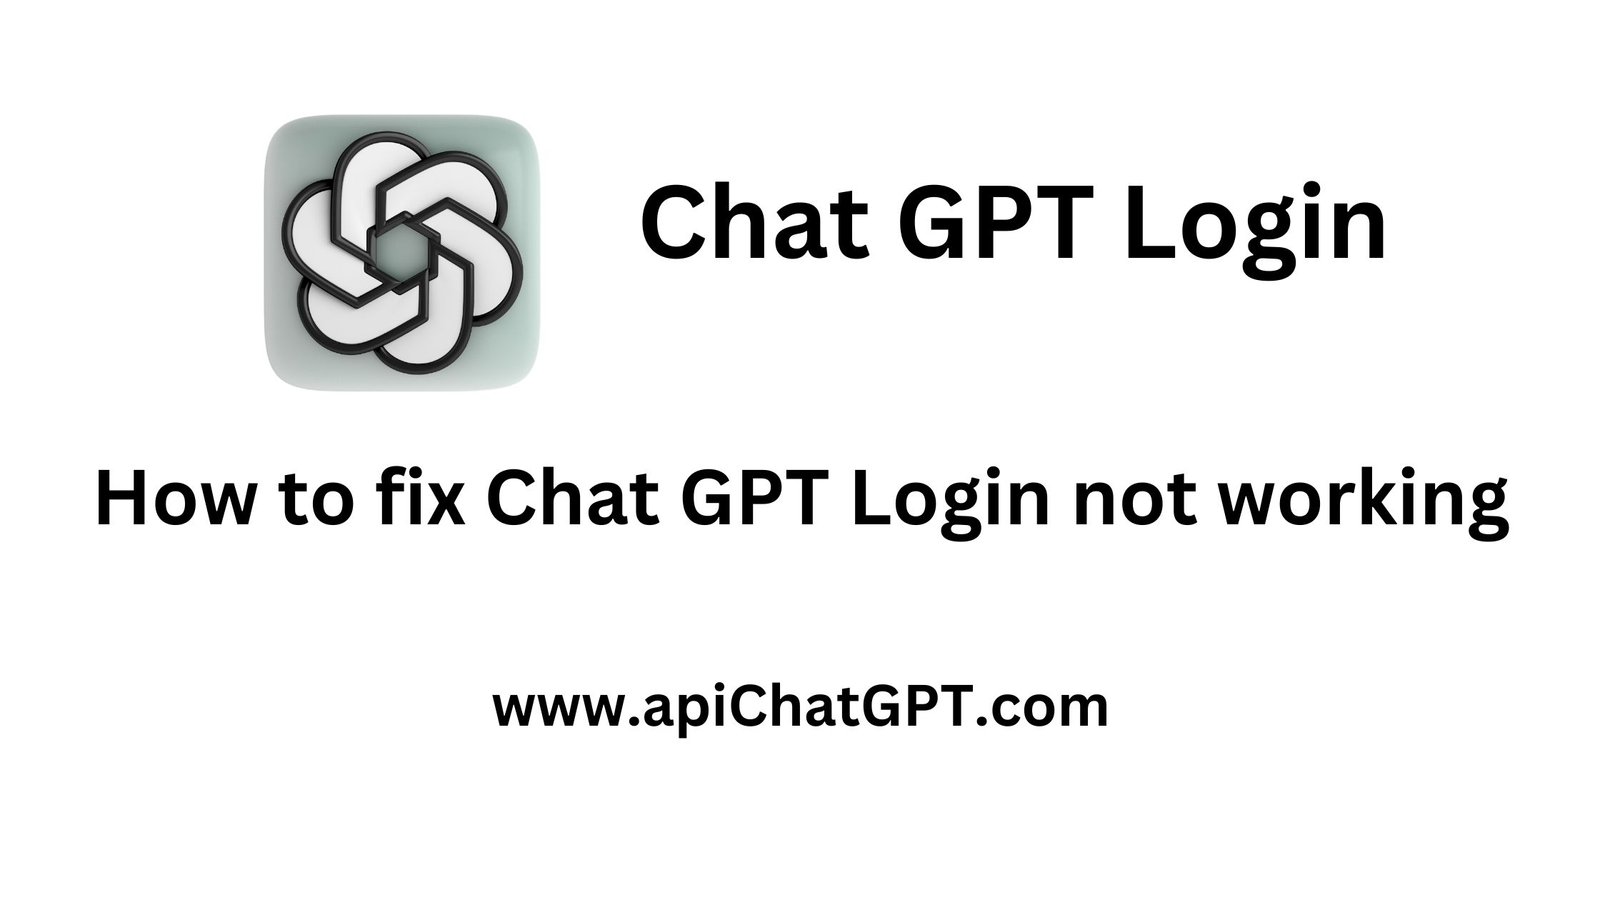 How to fix Chat GPT Login not working - Chat GPT Login